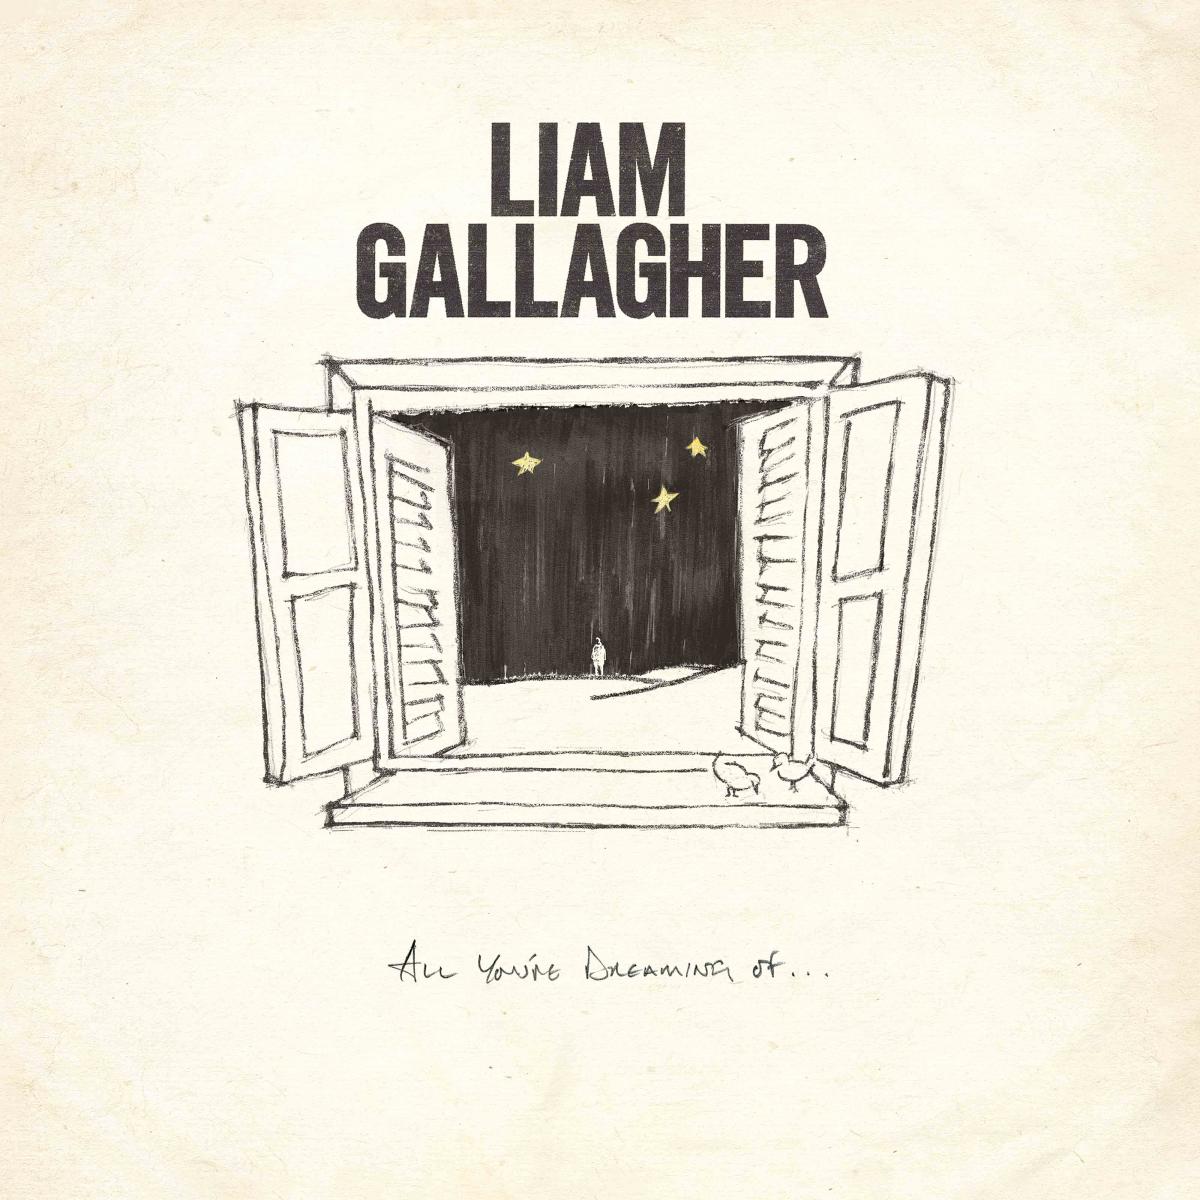 News – Liam Gallagher – All You’re Dreaming Of